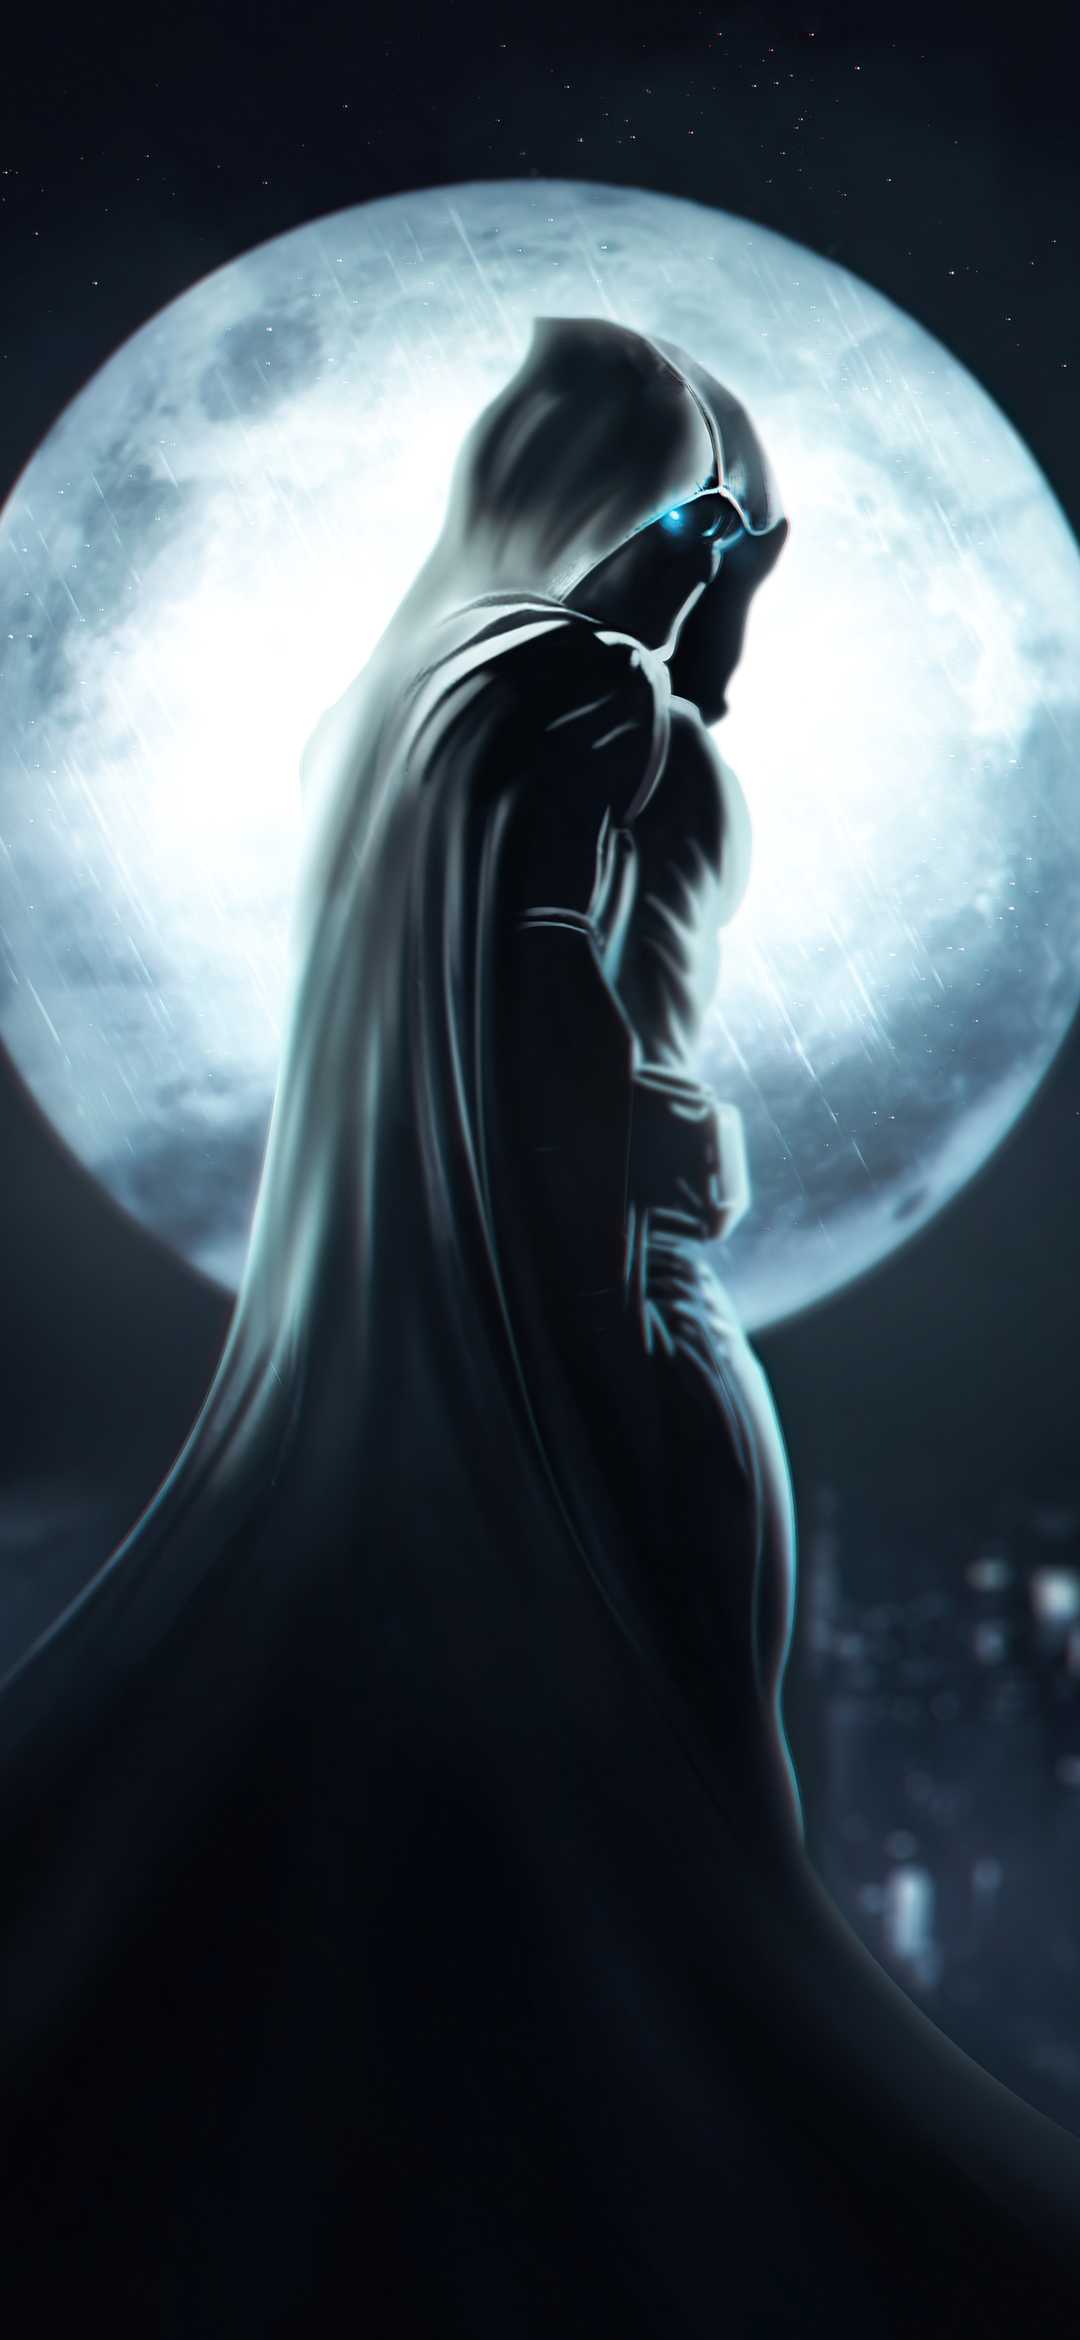 Moon Knight Background Wallpaper Download